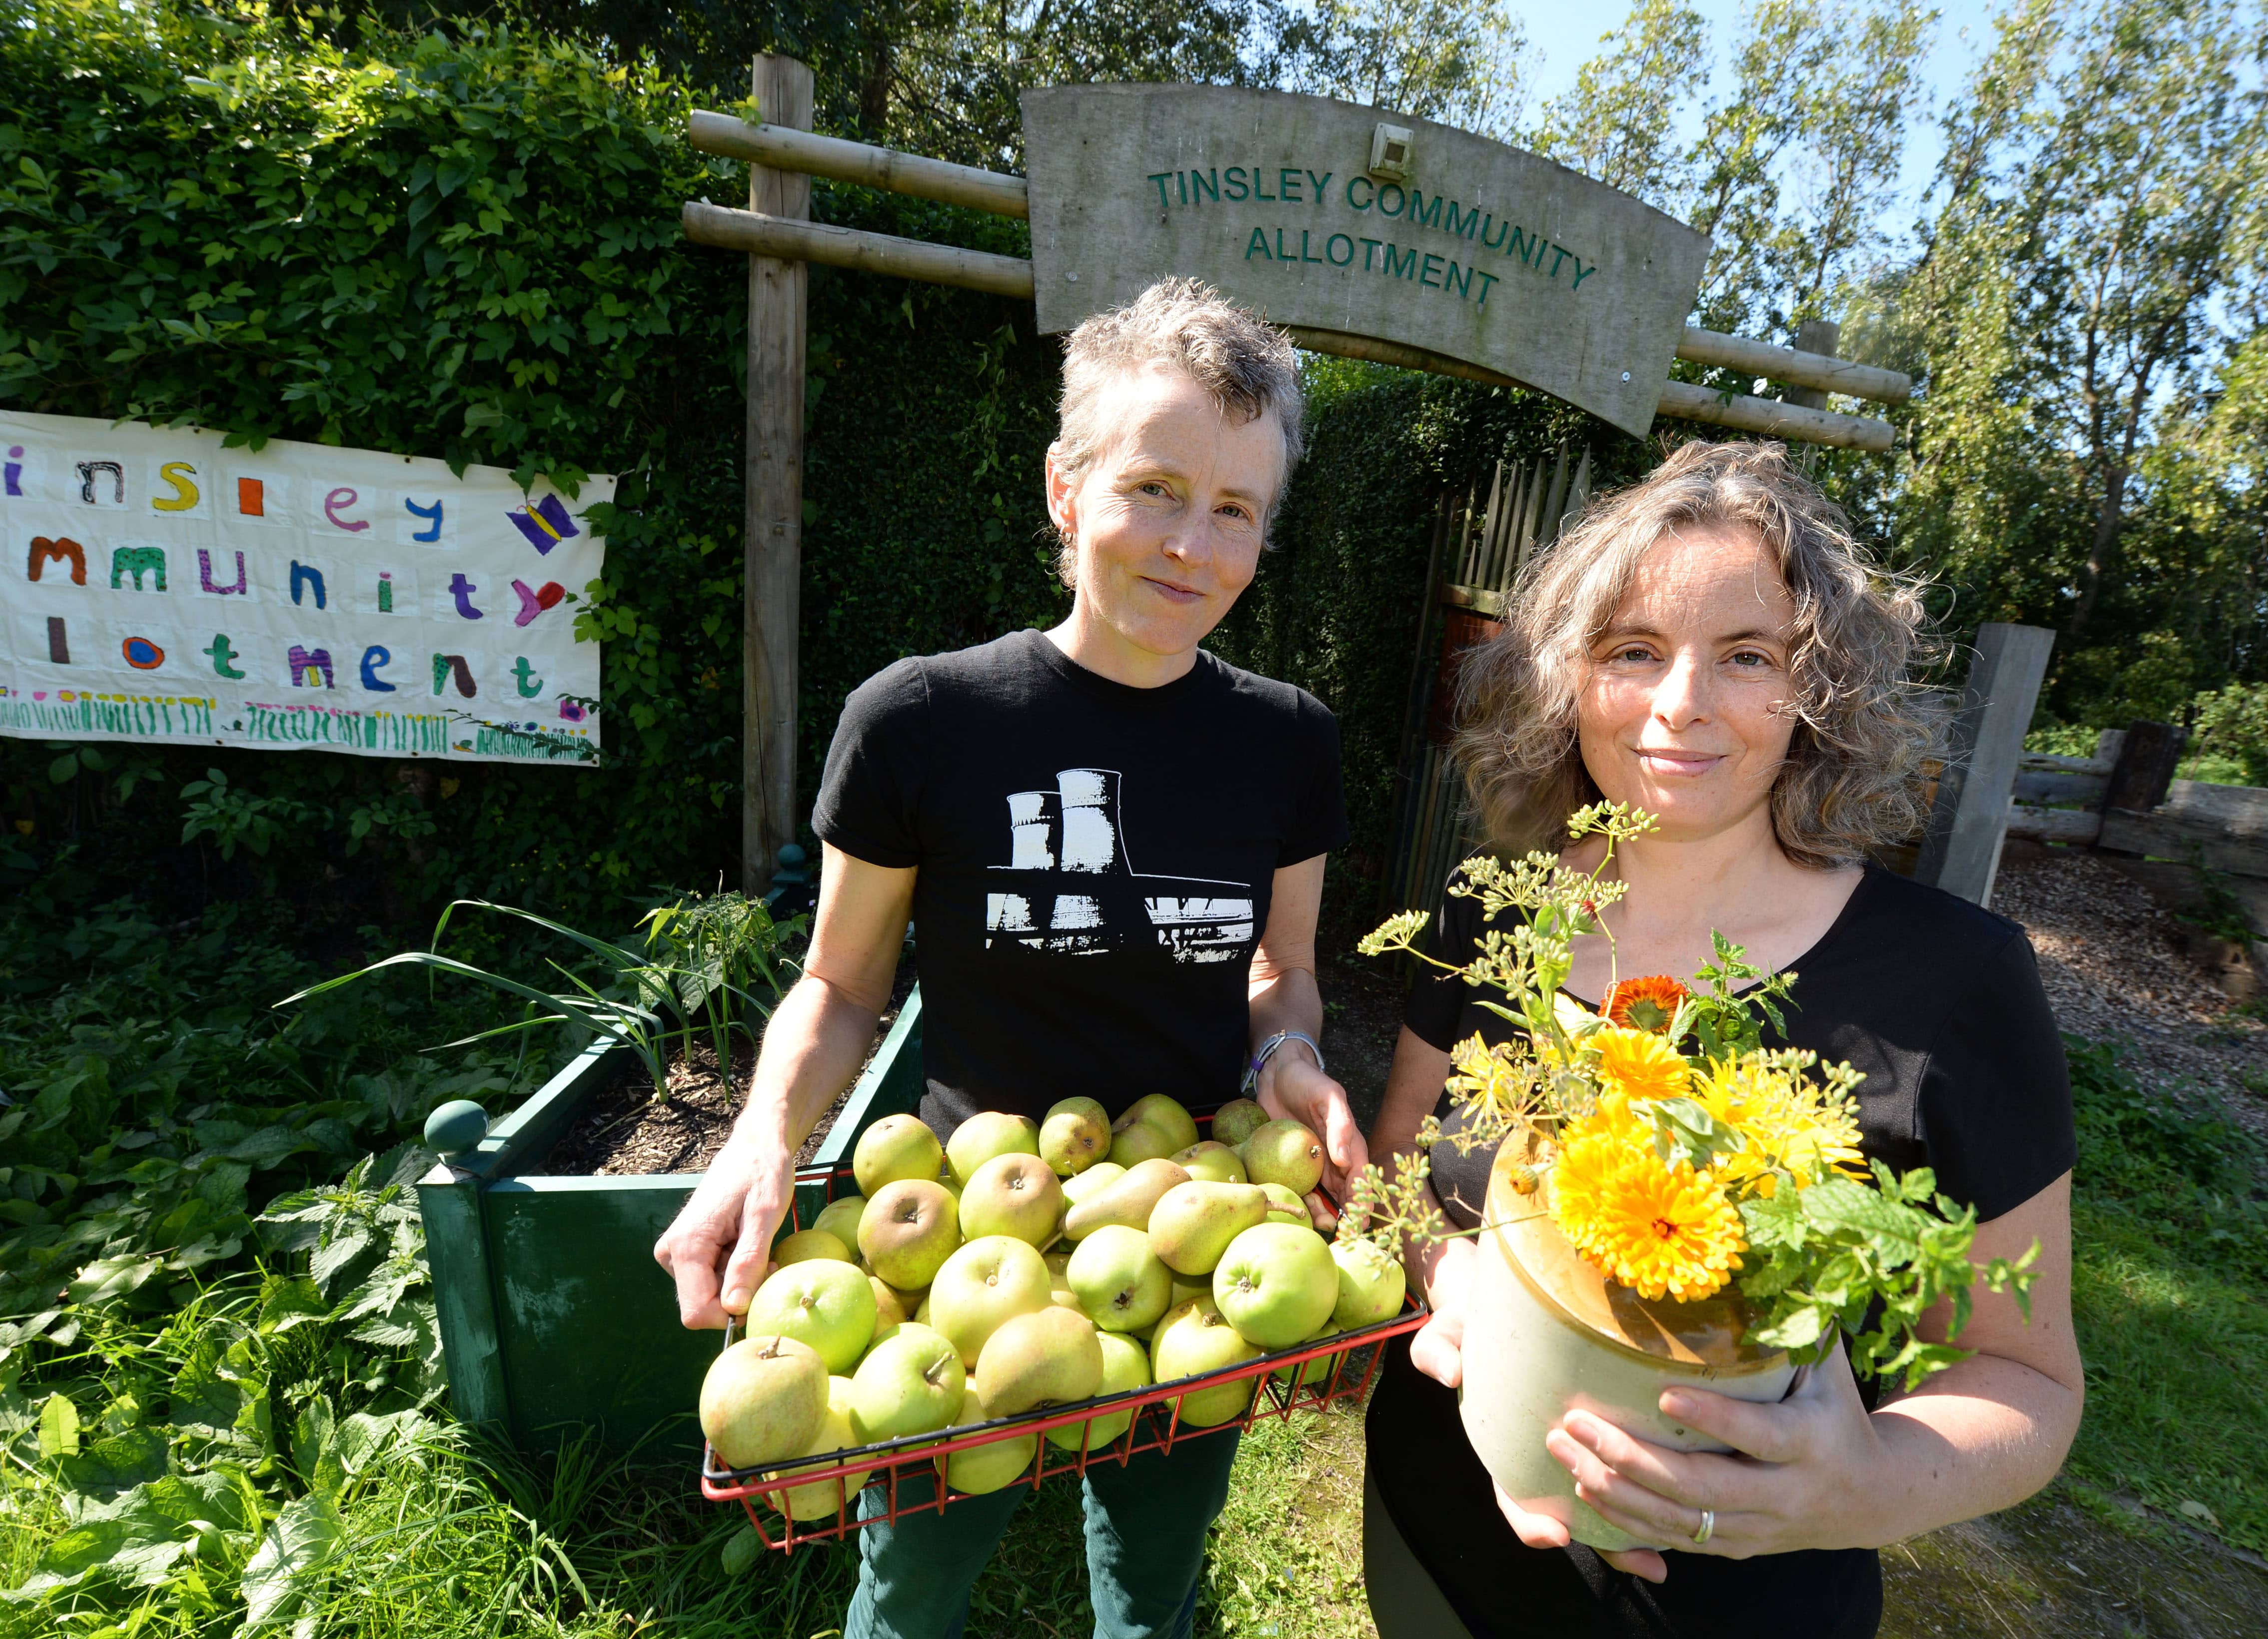 Allotment workers Jess Banham (L) and Jacqui Dace (R), at the Tinsley Community Allotment in Sheffield, South Yorkshire, which has won a 'Cultivation Street' award - a competition run by celebrity gardener, David Domoney.